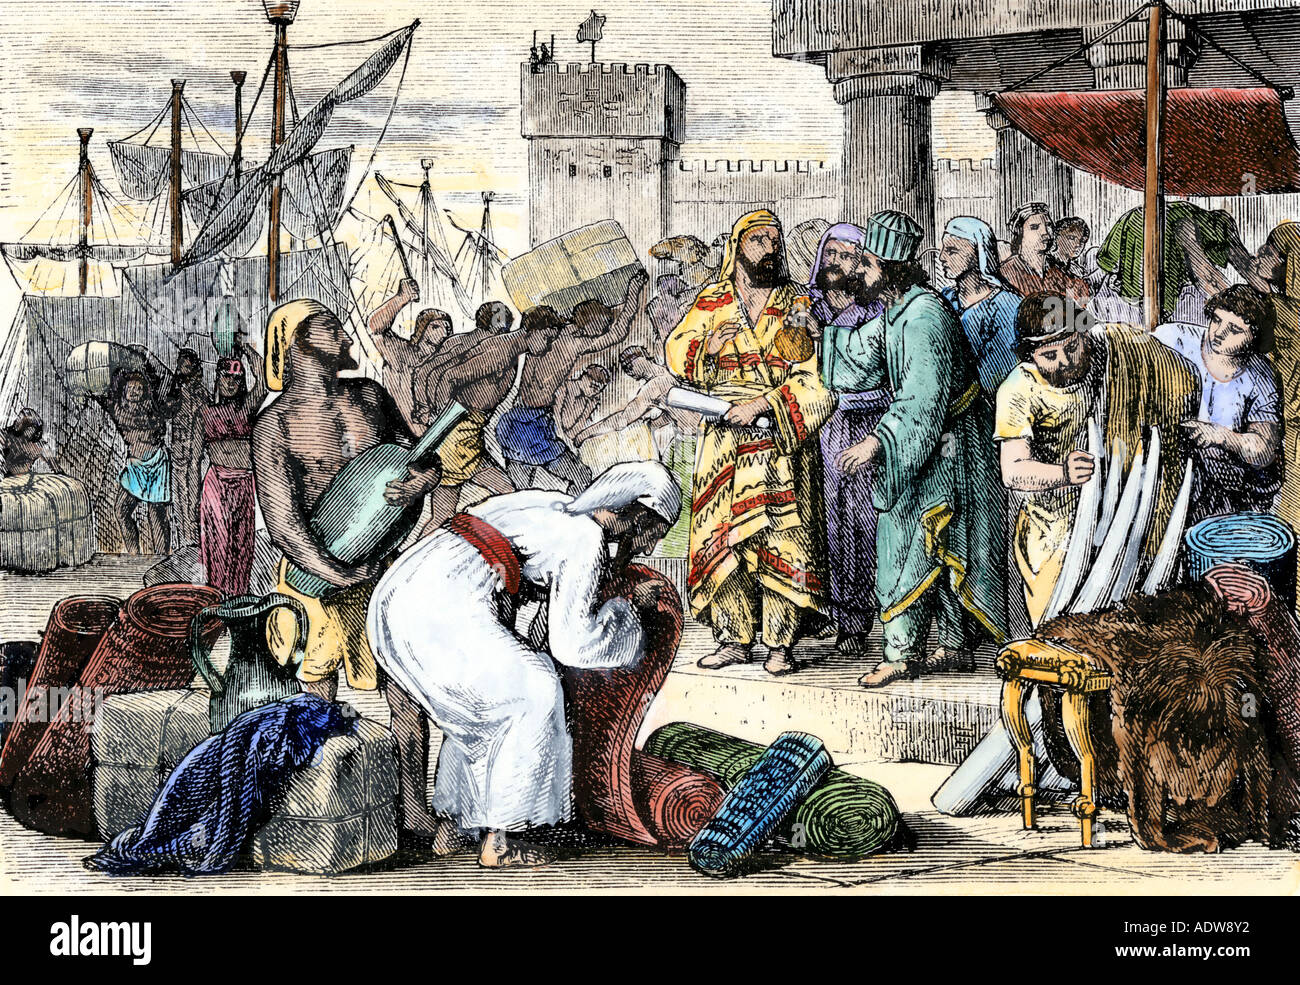 Ancient Phoenician sailors trading goods in a Mediterranean seaport. Hand-colored woodcut Stock Photo